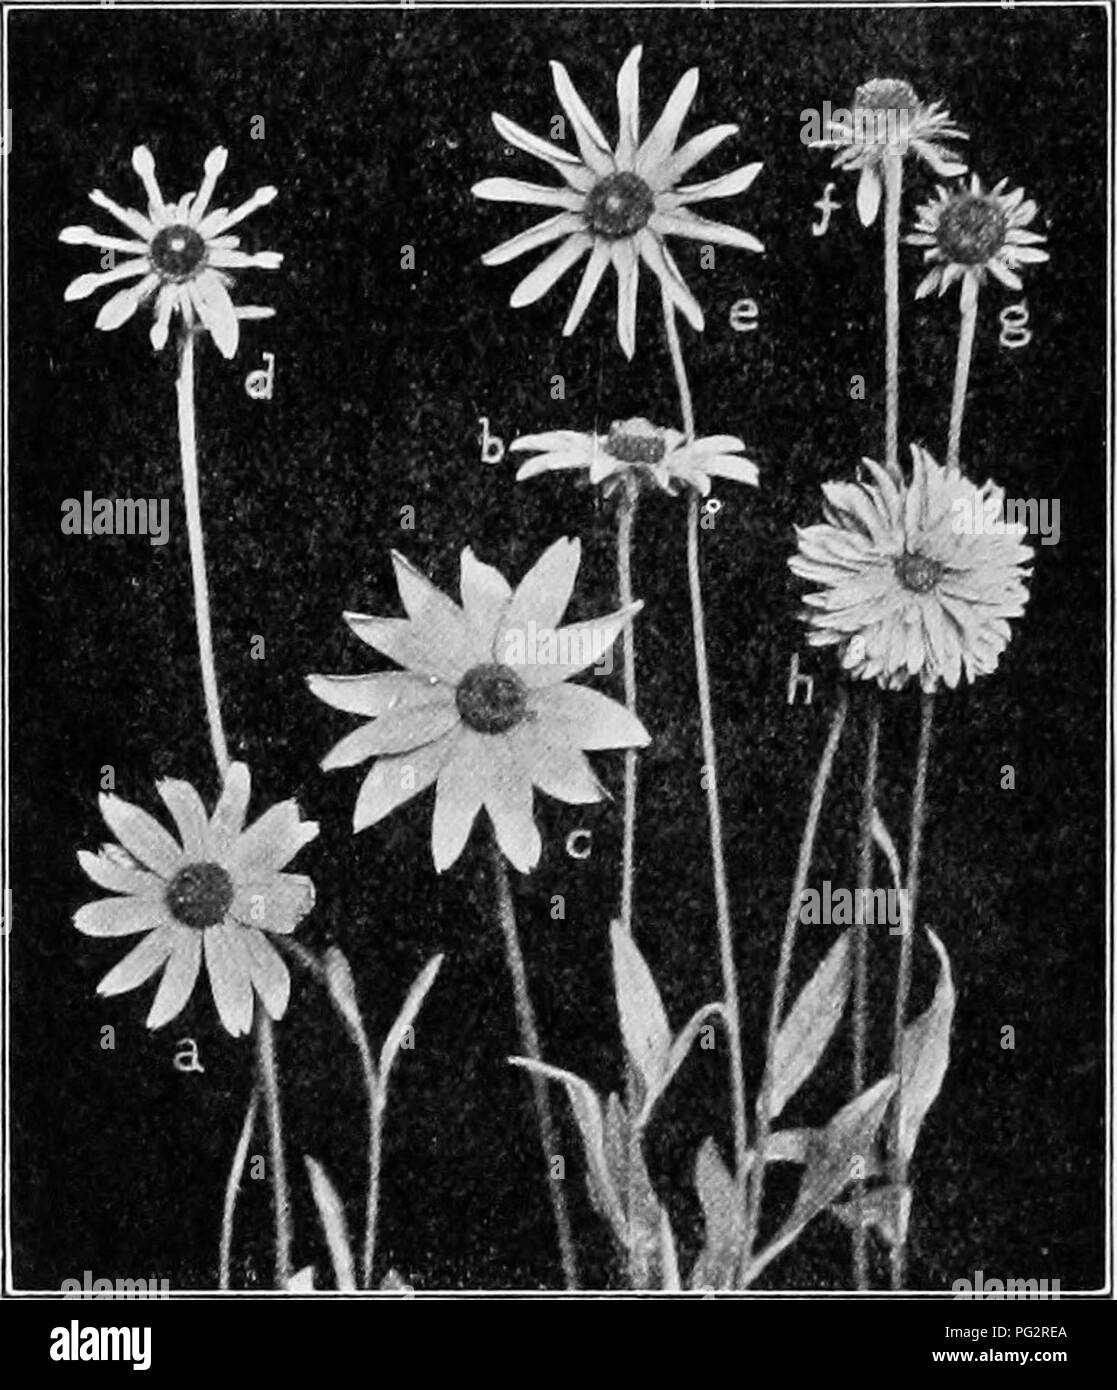 . Heredity and evolution in plants. Heredity; Plants. 114 HEREDITY AND EVOLUTION IN PLANTS ducing a &quot;bud-sport&quot; (Fig. 60). Such was the origin of the seedless naval orange from the seed-bearing orange. 91. The Evening-primrose.—In 1886 de Vries began to search for a species that was in a mutating condition, be-. FiG. sg.—Yellow daisy, or cone-flower {Rudbechia sp.), showing varia- tions of the character of mutations in the ray- and disc flowers. At i the normally ligulate corollas are tubular; at / they have all aborted, except two; at h many of the normally tubular disc-flowers have Stock Photo